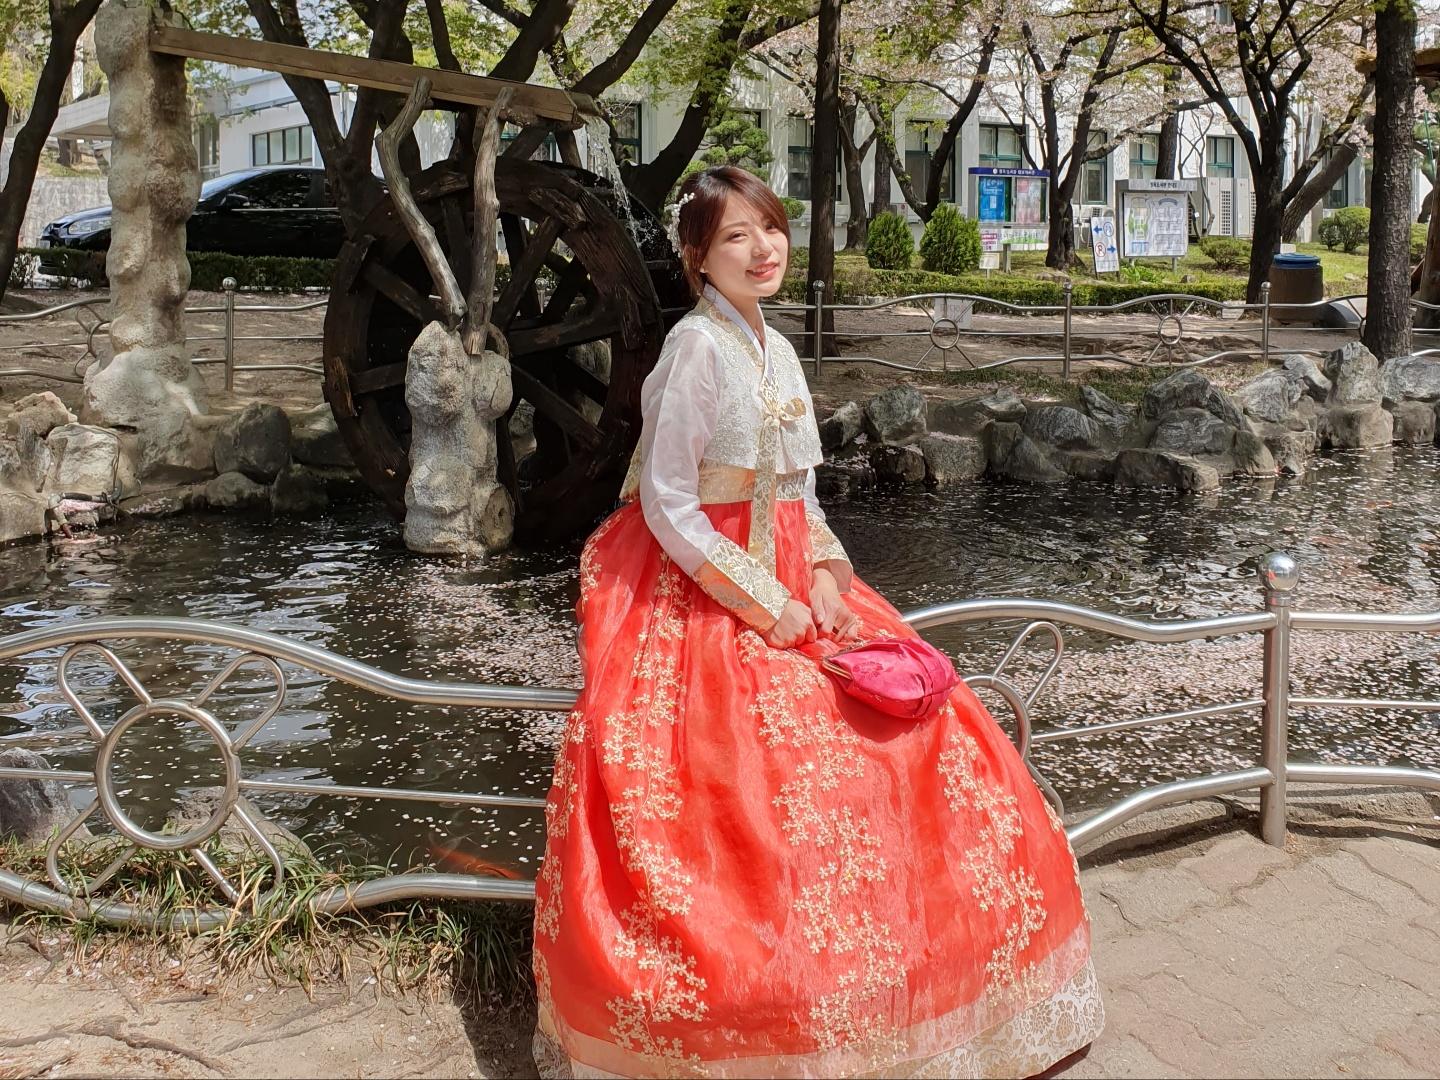 A happy woman in traditional Gyeongbokgung hanbok poses in a botanical garden near a temple, surrounded by lush trees and water.